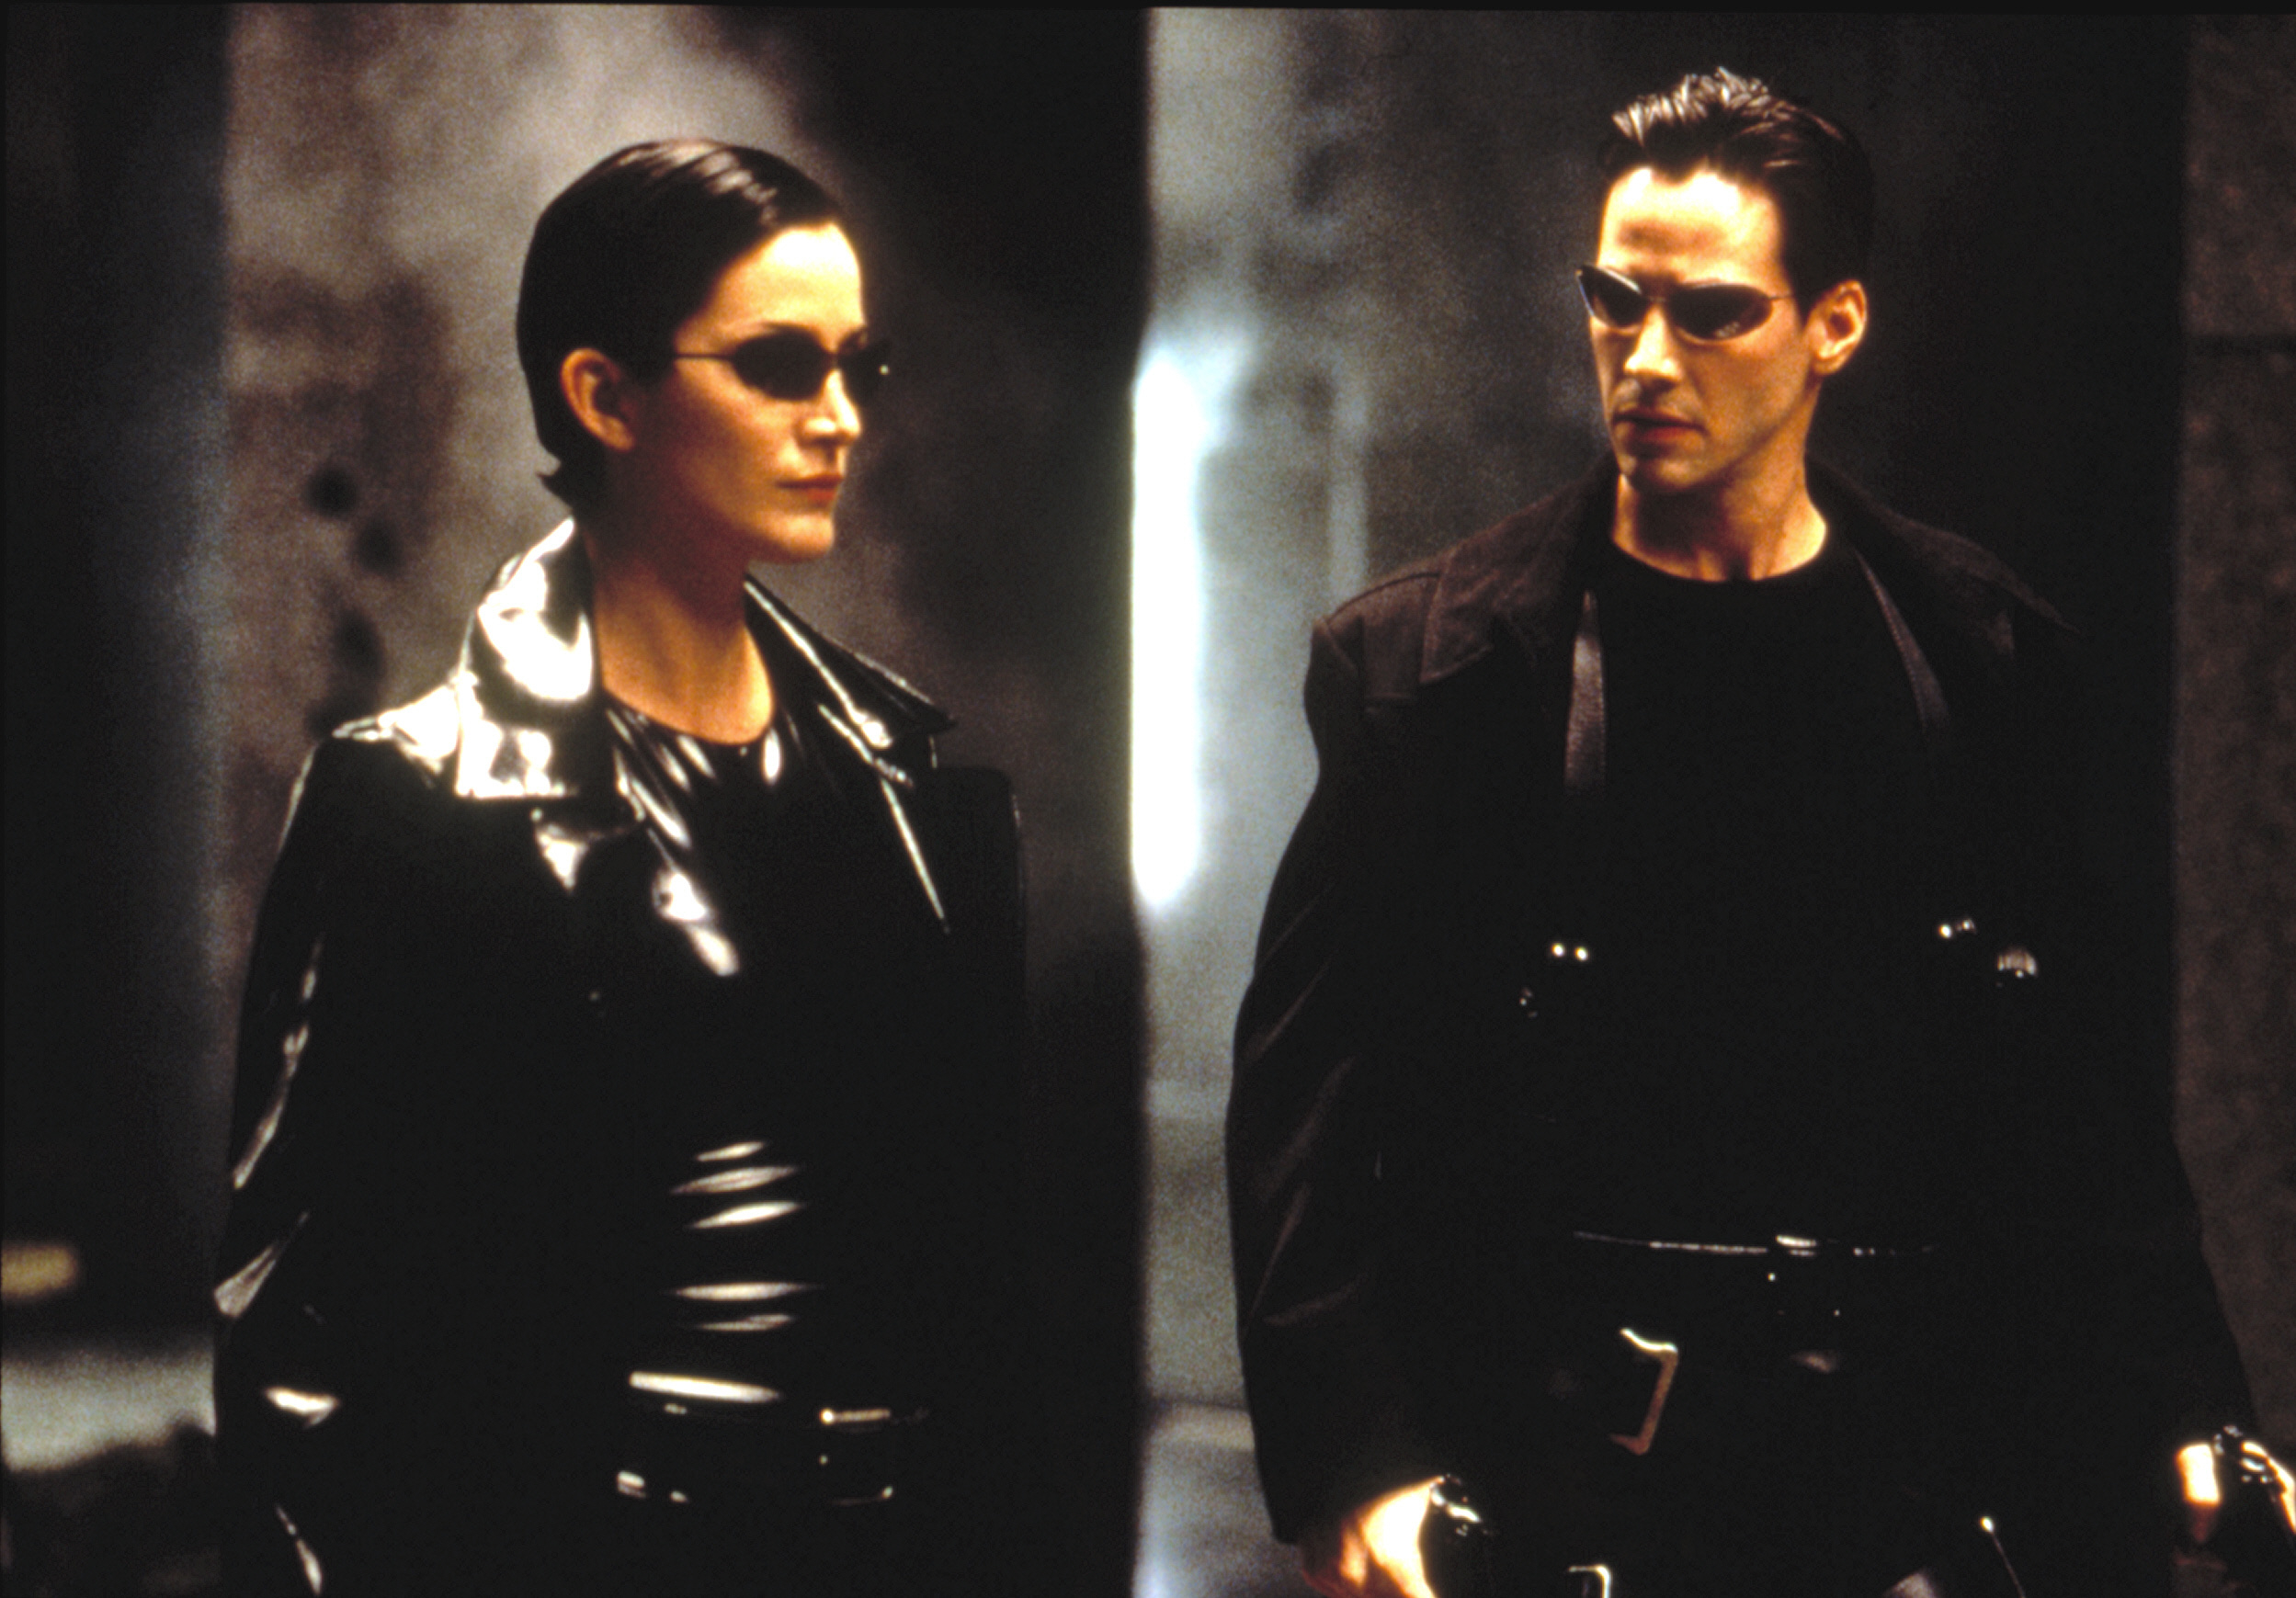 Characters Trinity and Neo stand side-by-side in &#x27;The Matrix&#x27;, wearing signature black leather outfits